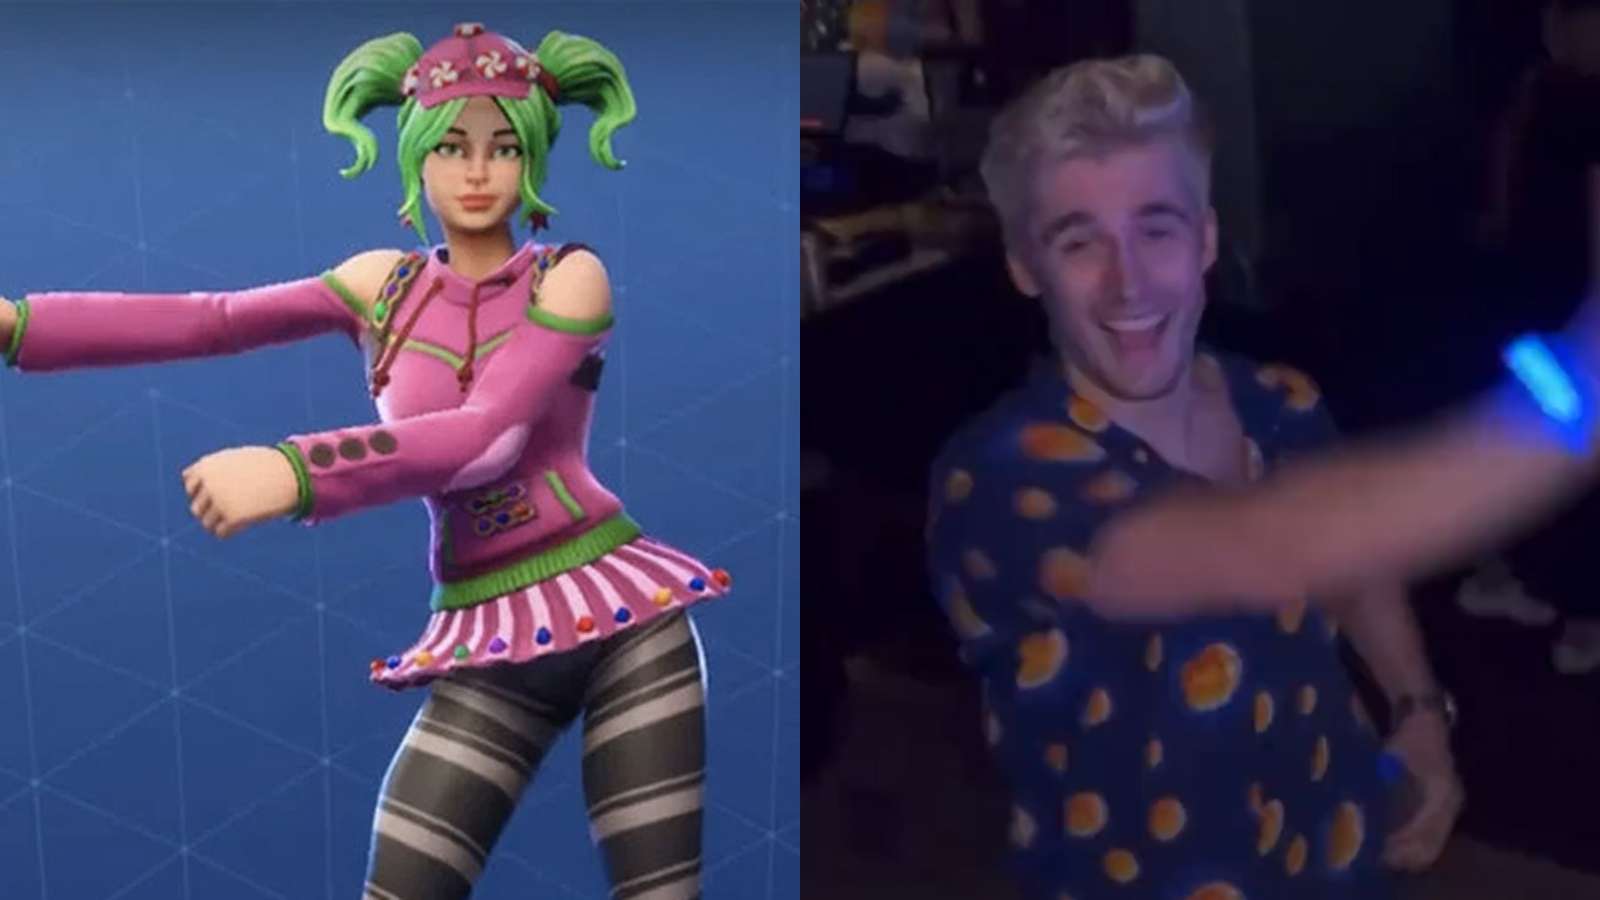 ludwig dancing next to fortnite character